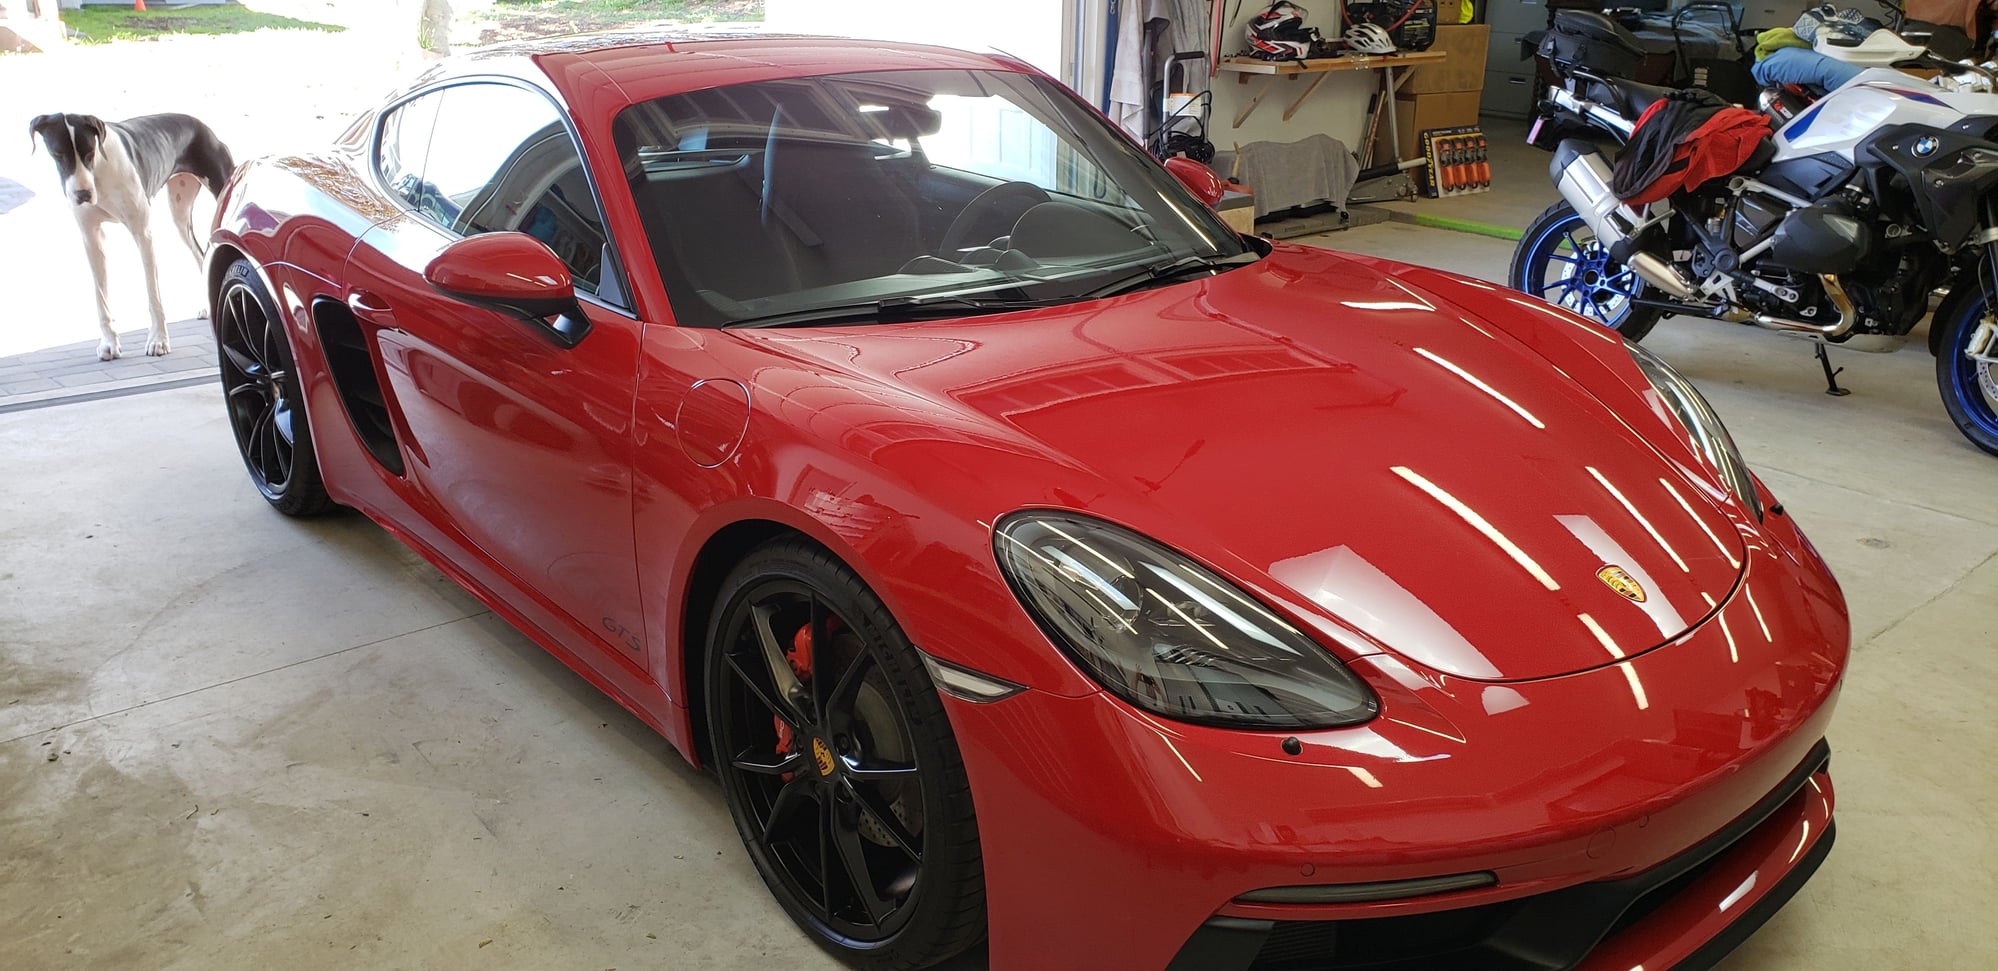 2018 Porsche 718 Cayman - 2018 Cayman GTS, CPO, 6sp manual, Carmine Red $83,500 - Used - VIN WP0AB2A85JK279742 - 3,965 Miles - 4 cyl - 2WD - Manual - Coupe - Red - San Diego, CA 92008, United States